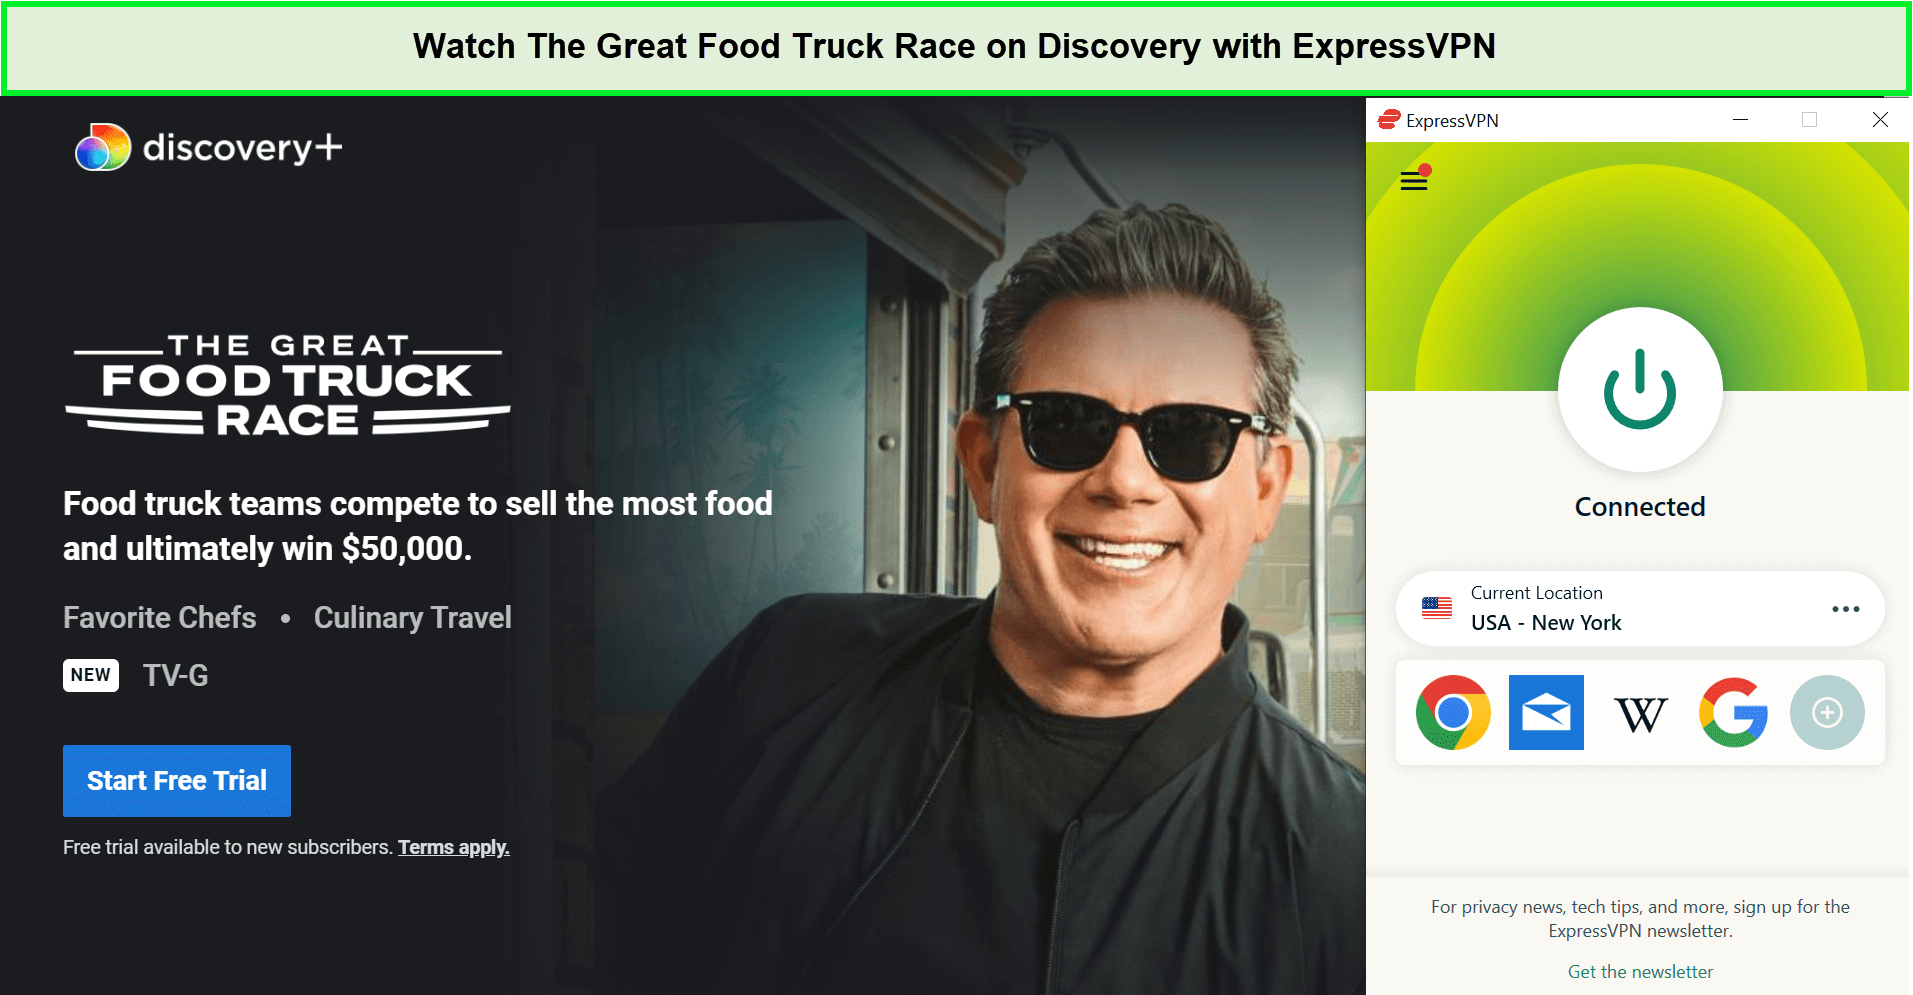 Watch-The-Great-Food-Truck-Race-in-fr-on-Discovery-with-ExpressVPN